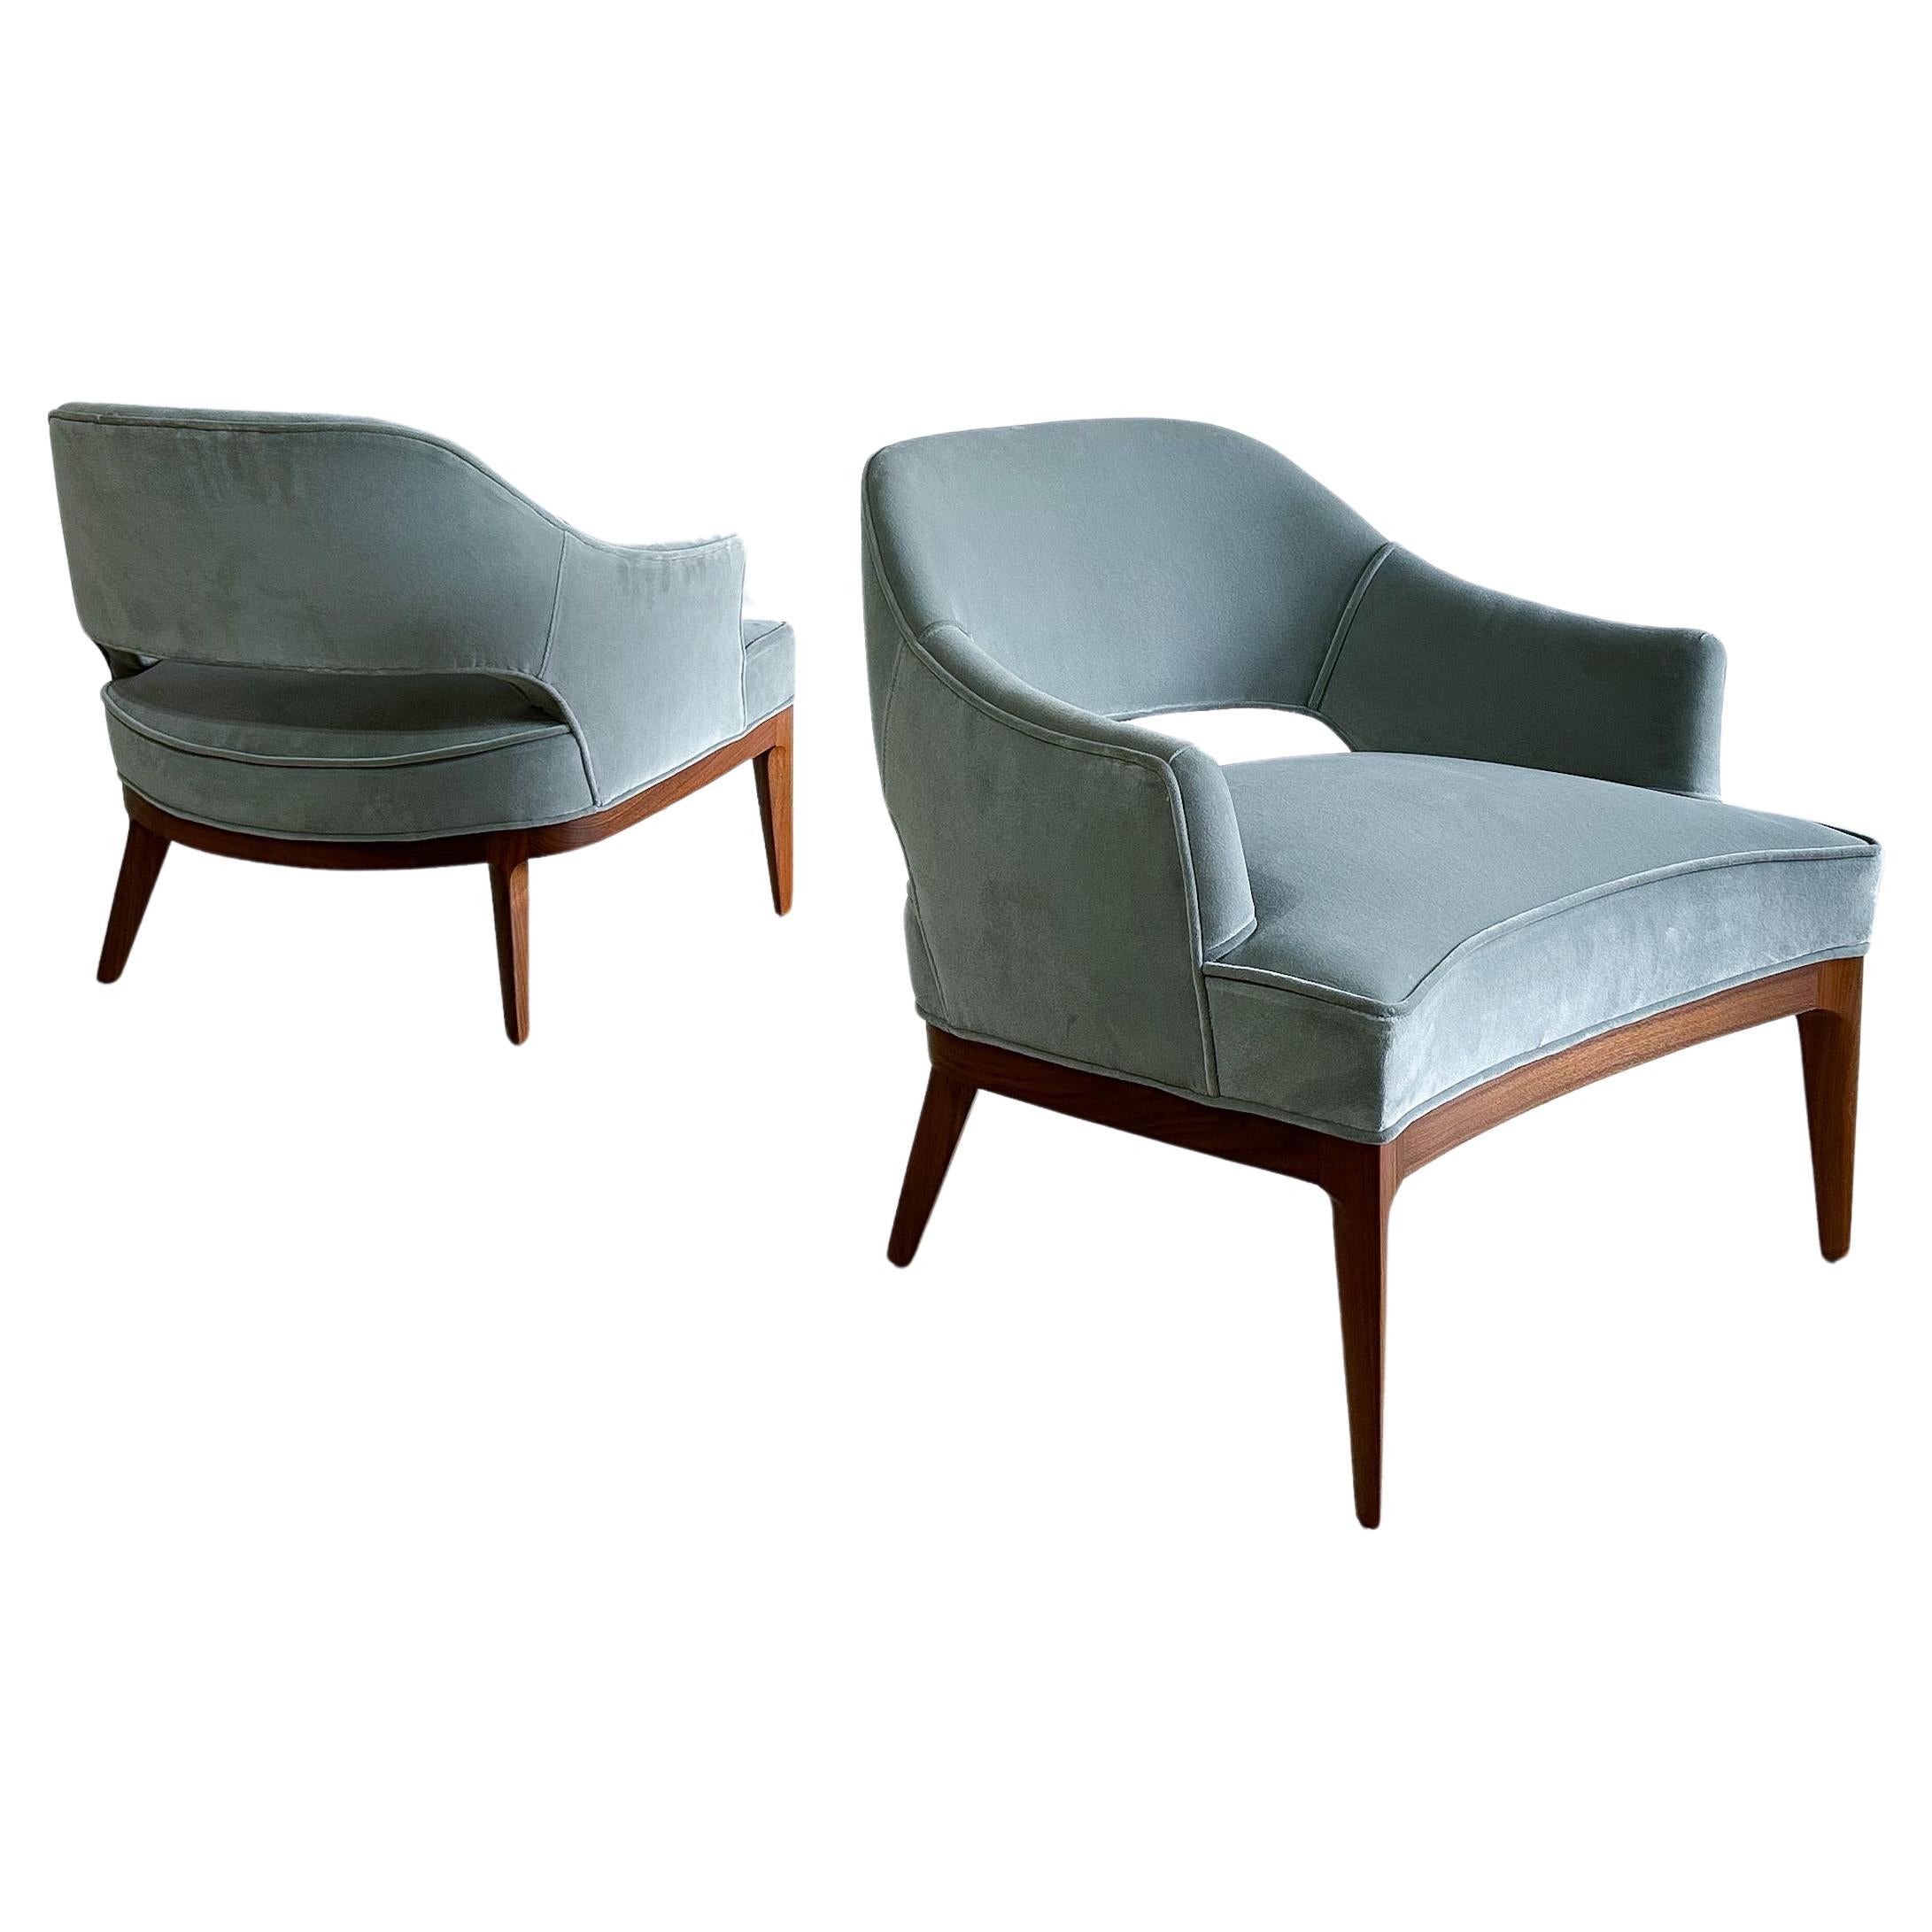 Pair of Lounge Chairs Attributed to Harvey Probber, Erwin Lambeth, 1960s For Sale